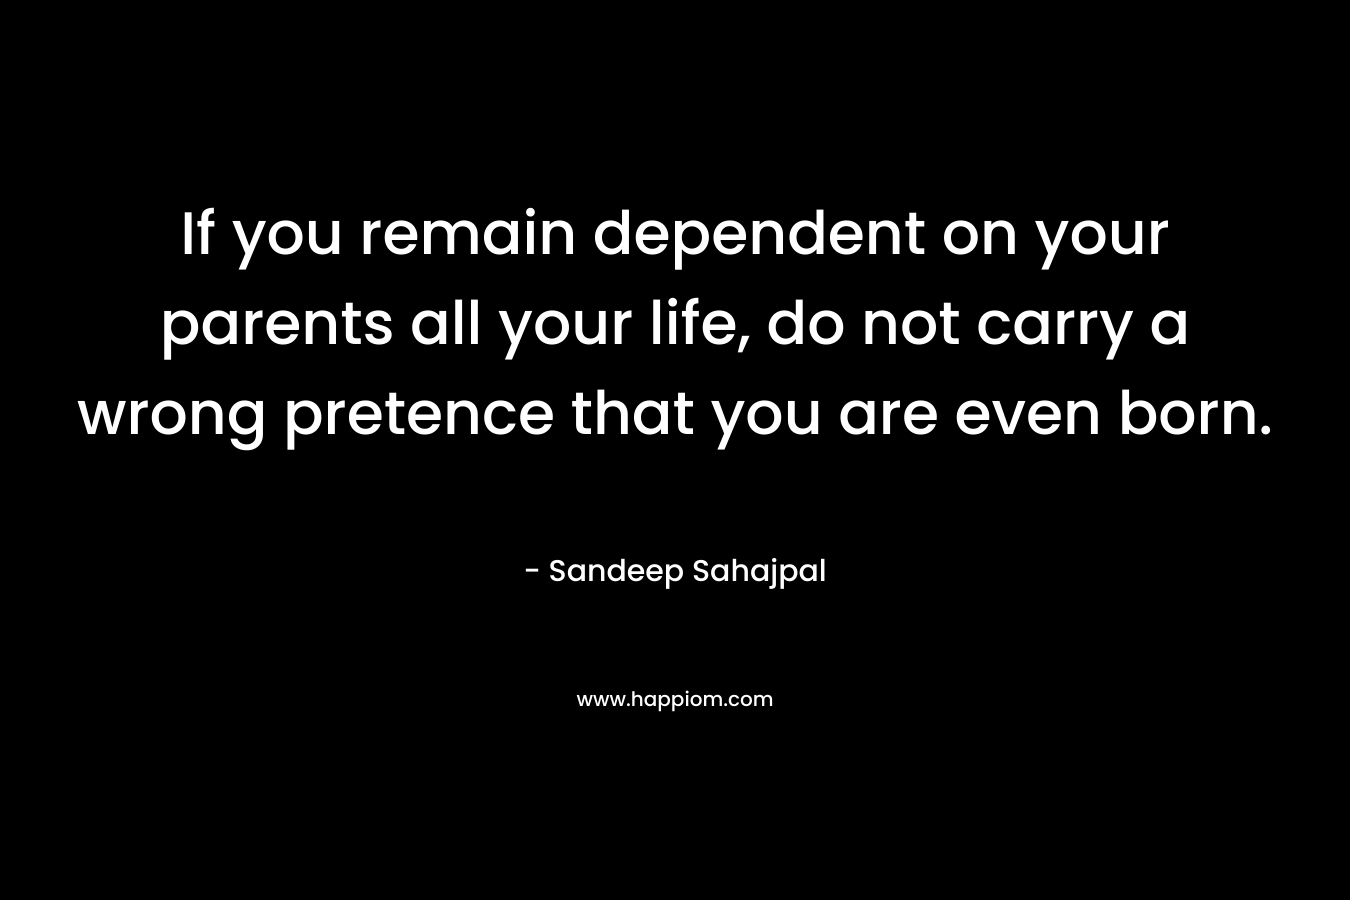 If you remain dependent on your parents all your life, do not carry a wrong pretence that you are even born.